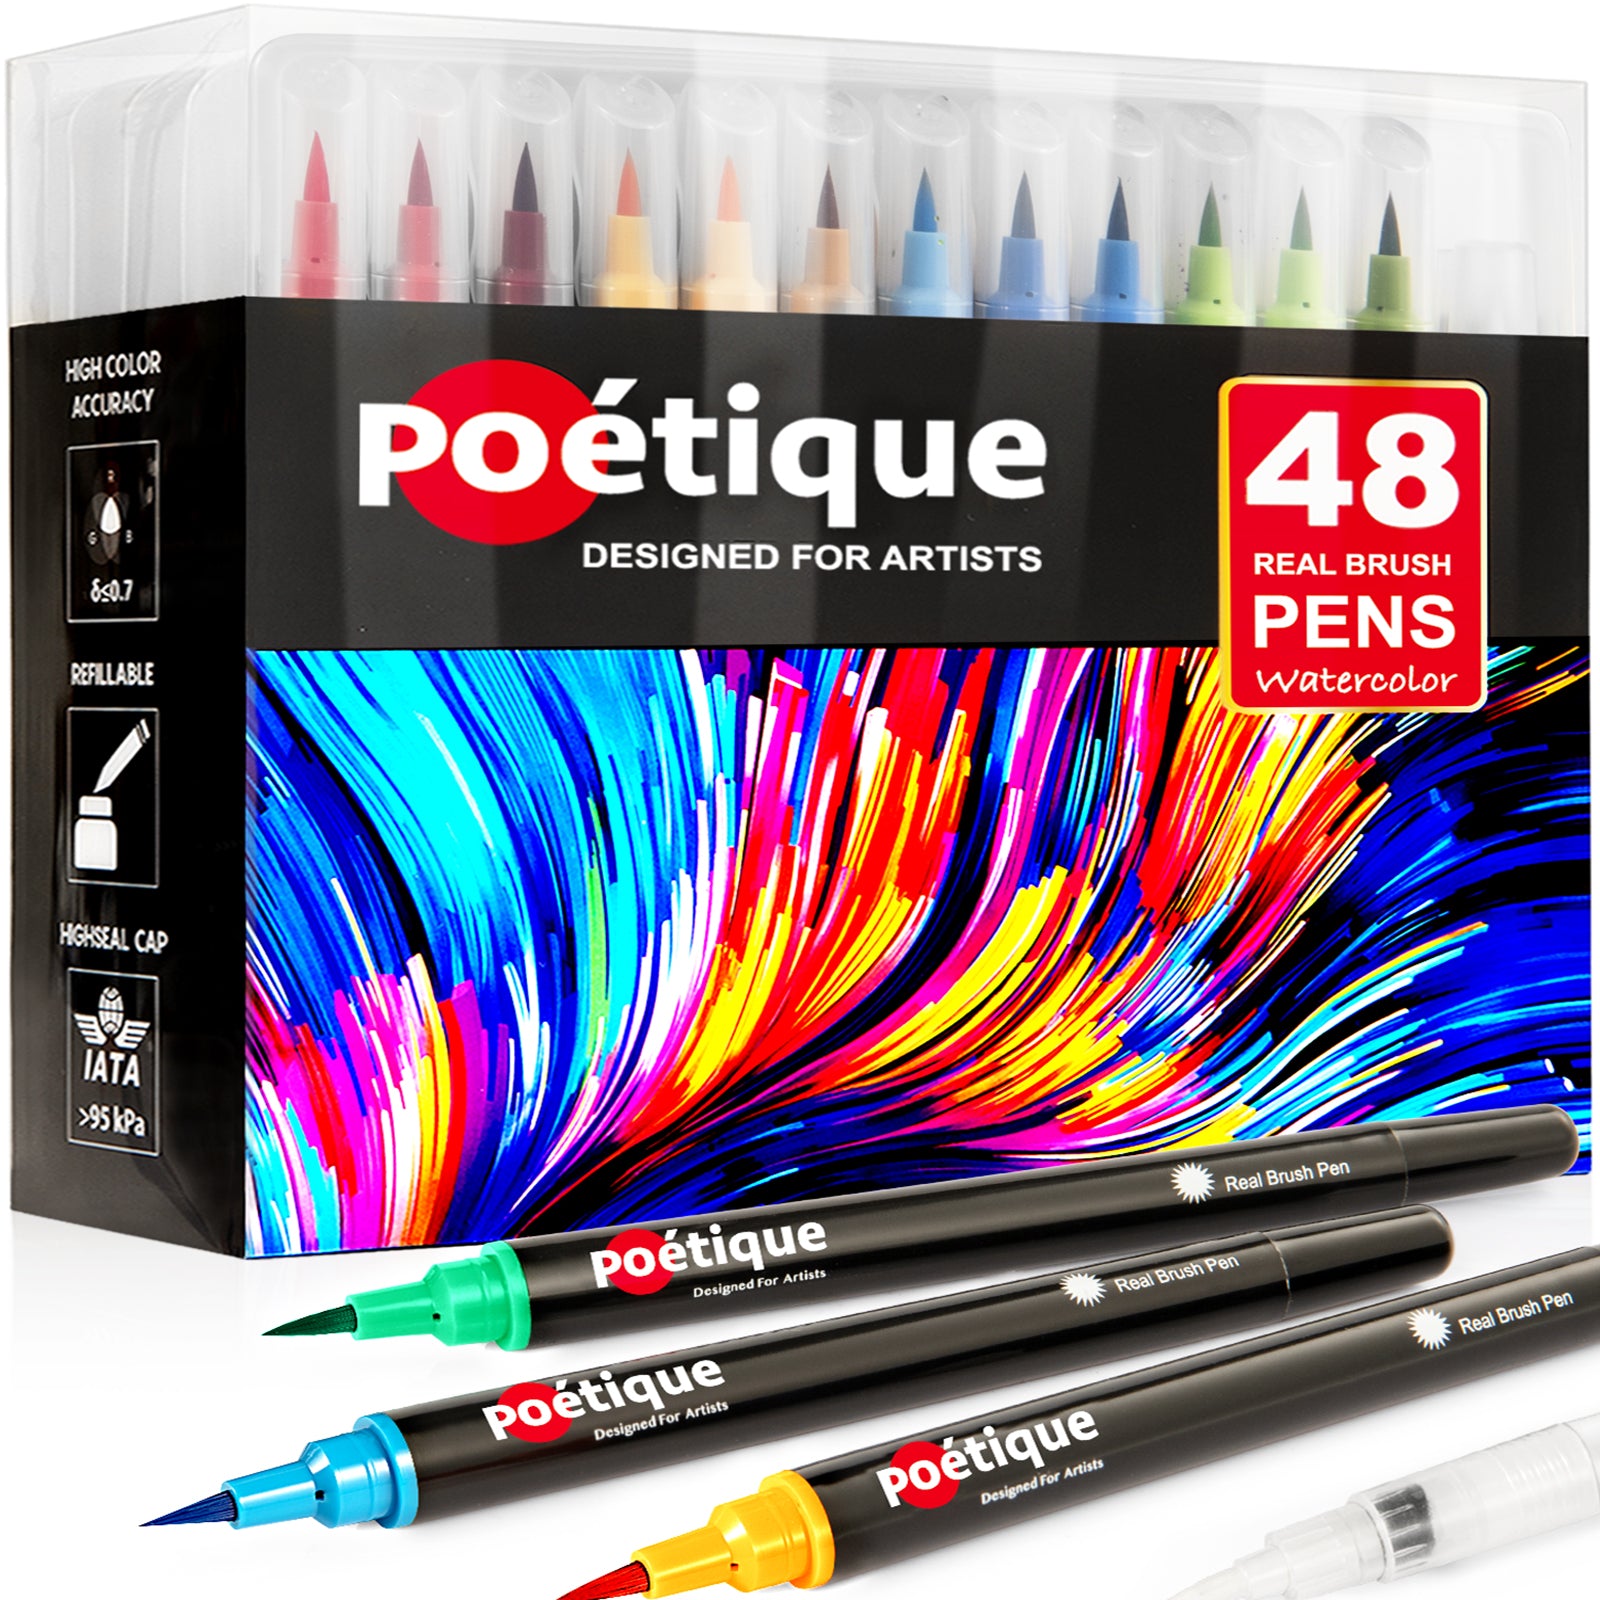 Gift Box : 48 Premium Watercolor Brush Pens, Highly Blendable, No Streaks, Water  Color Markers, Unbelievable Value, Water Brush Pen, for Beginner to  Professional Artist (48 Colors Brush Pens) 